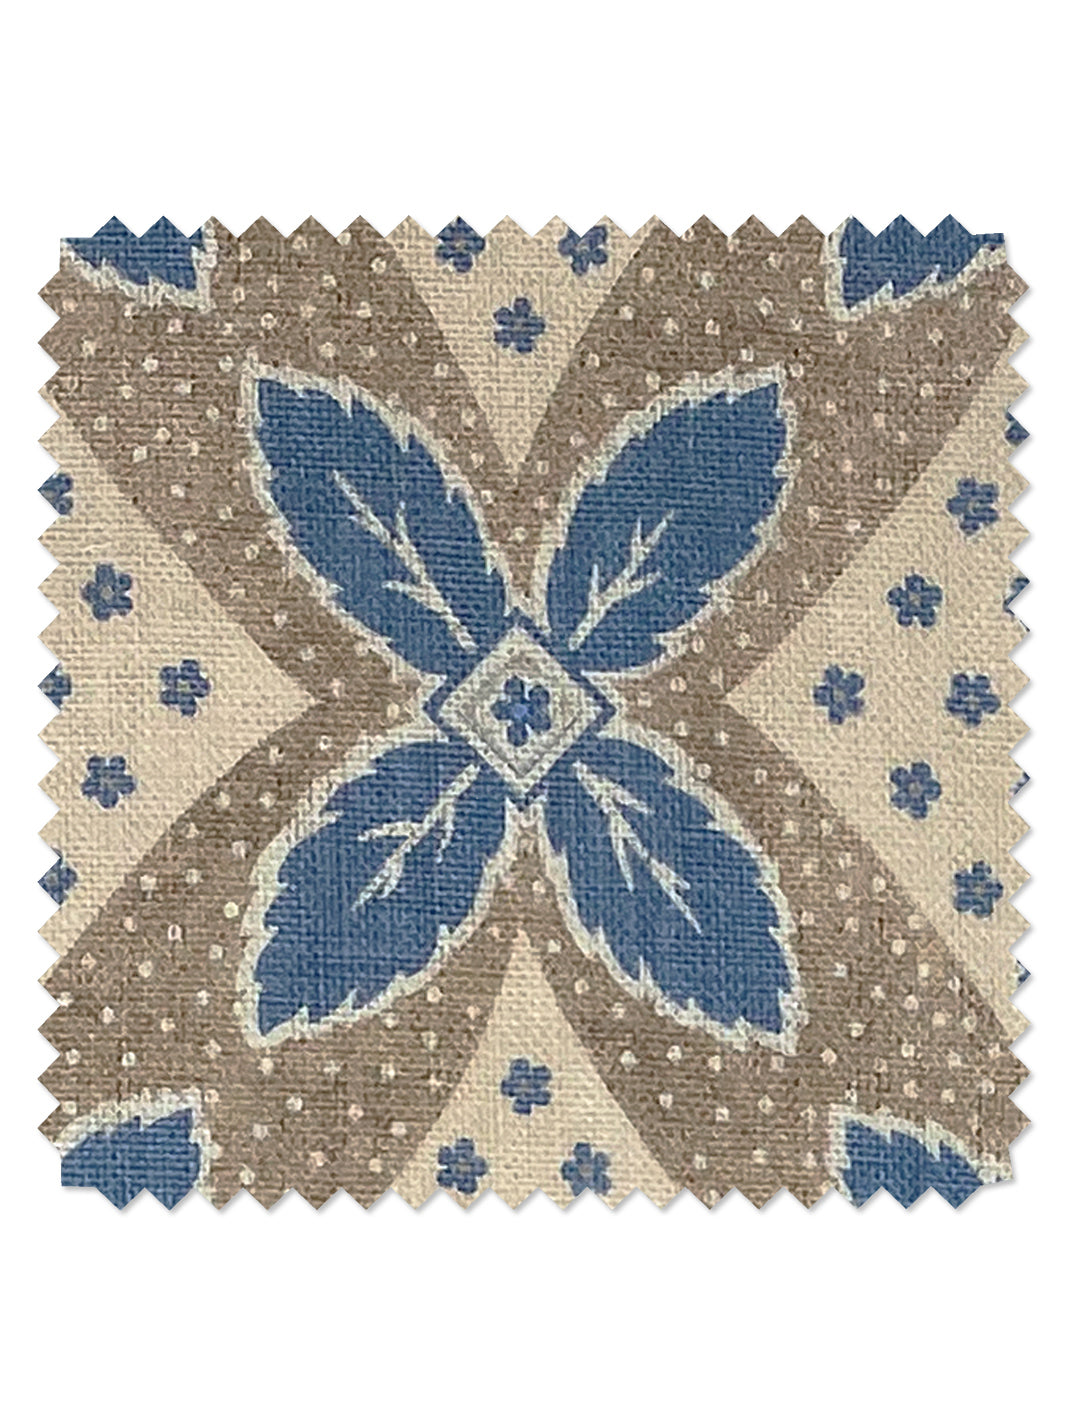 'Arthur' Linen Fabric by Nathan Turner - Blue on Taupe